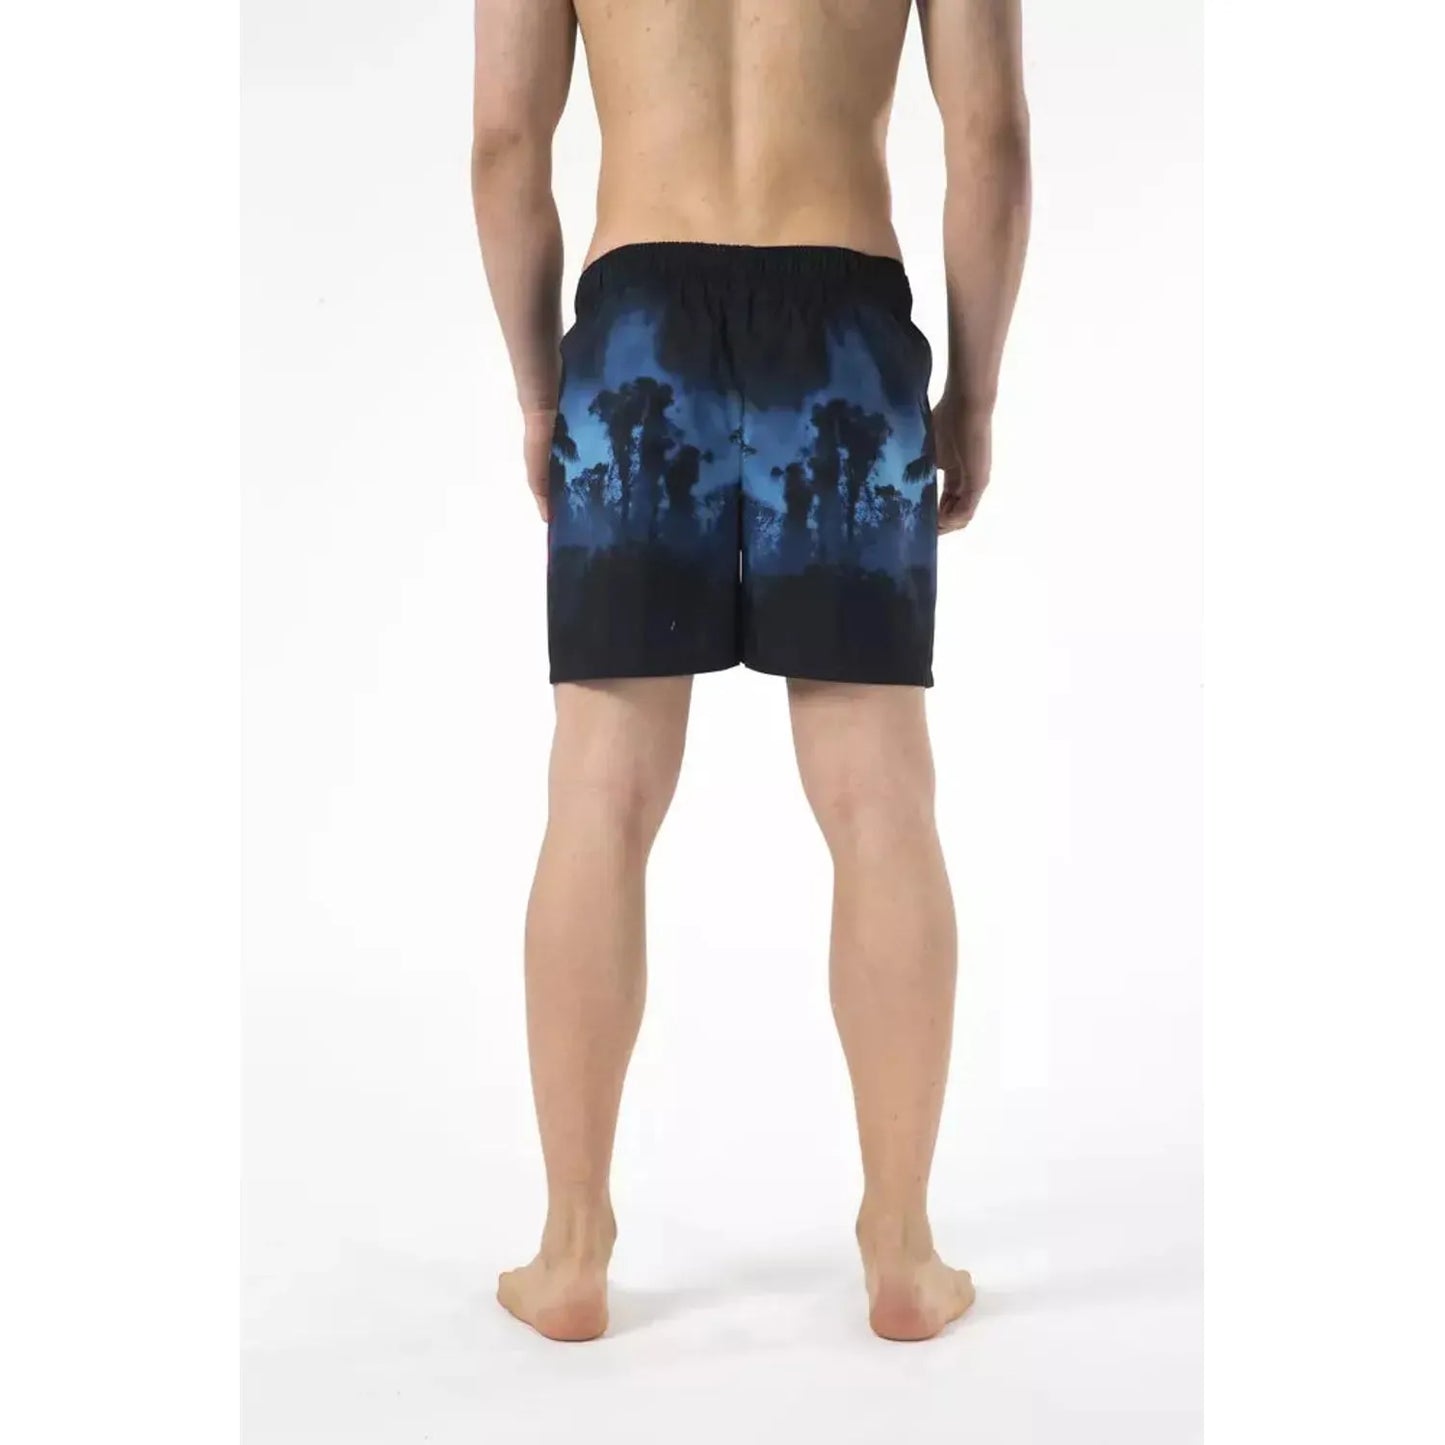 Just Cavalli Chic Printed Beach Shorts with Embroidered Logo black-swimwear-1 product-22578-1352445406-19-fd48a3ca-d48.webp